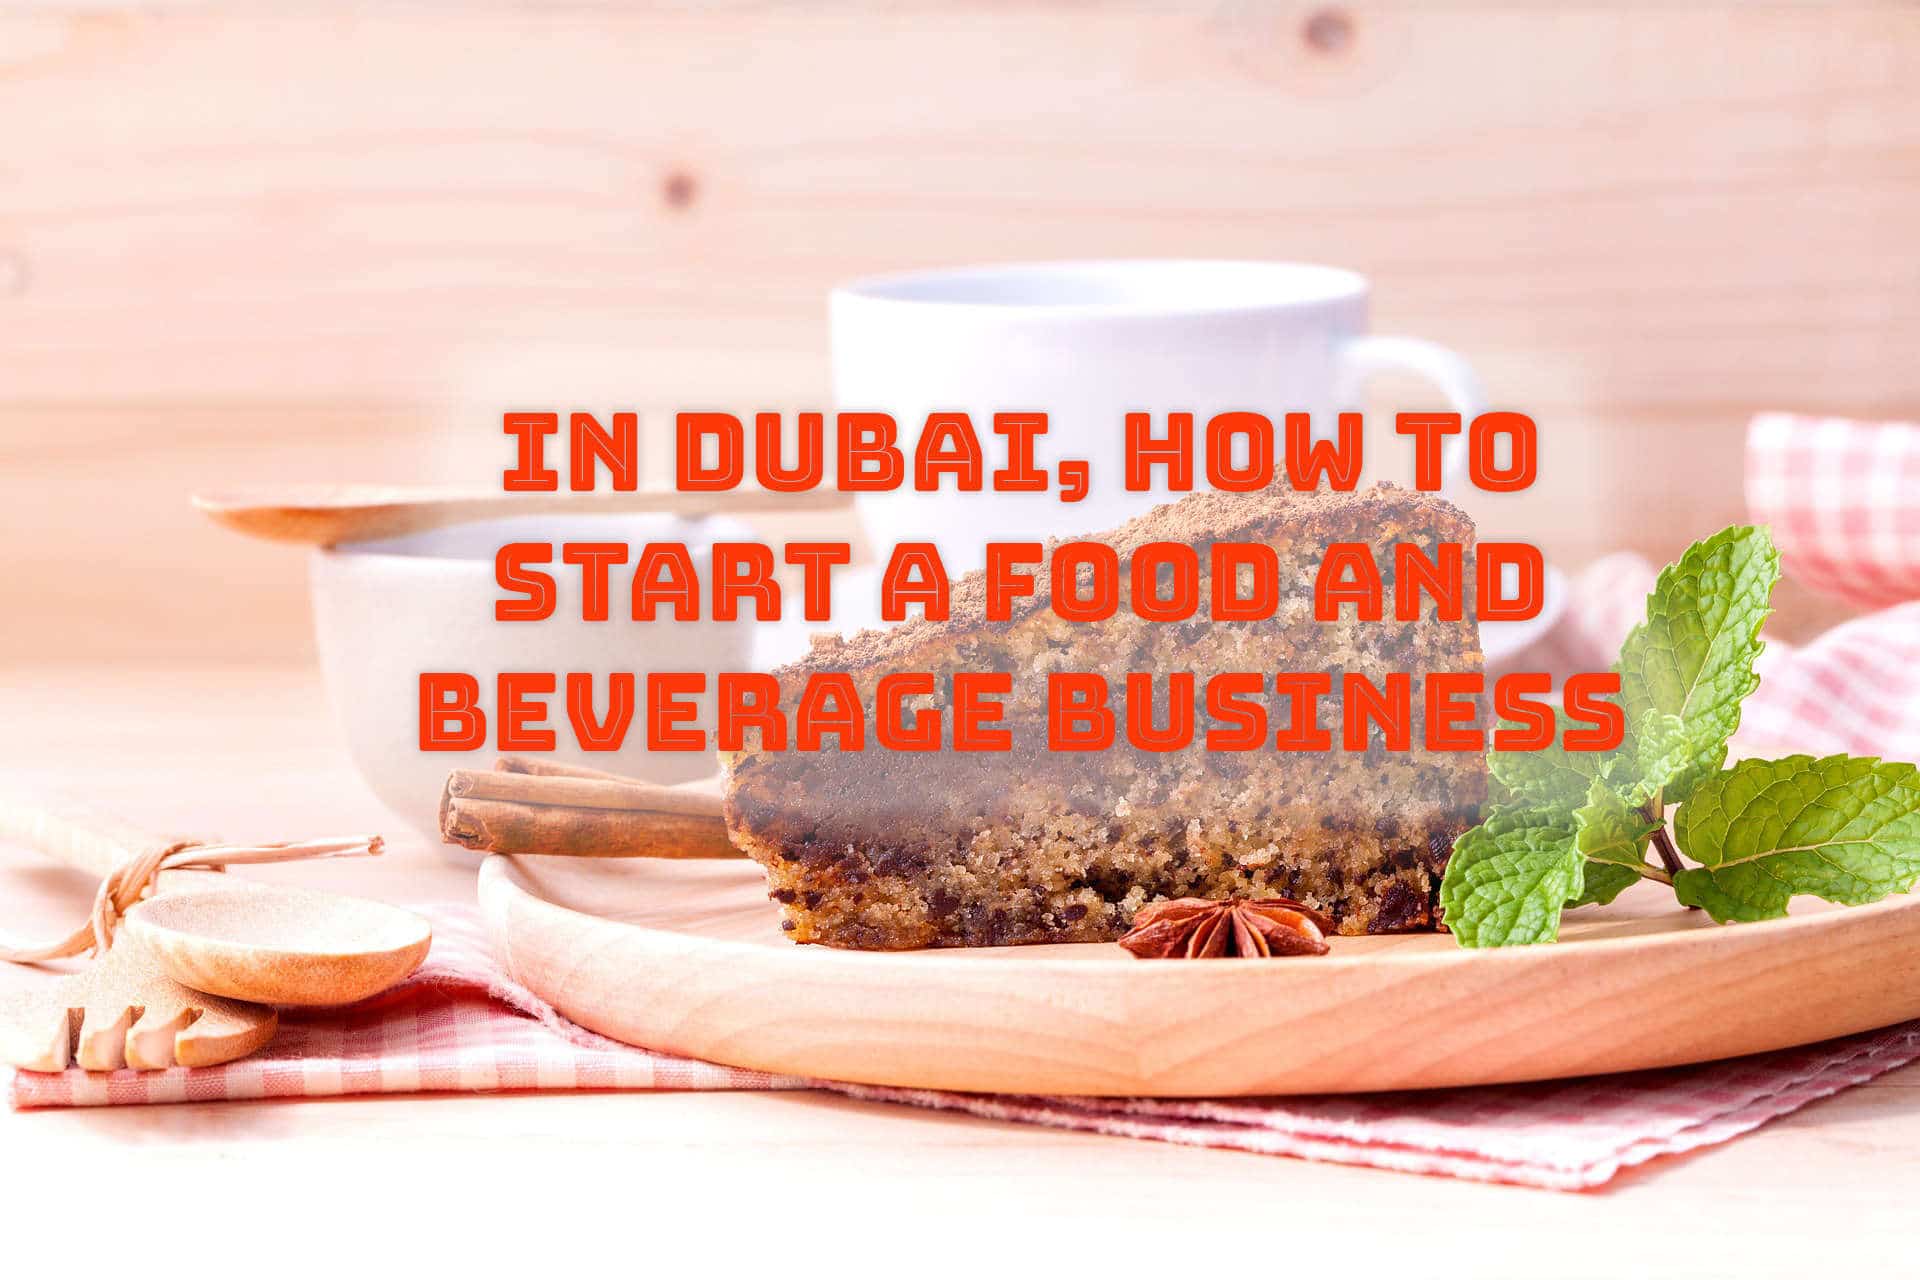 Start a Food and Beverage Business in Dubai